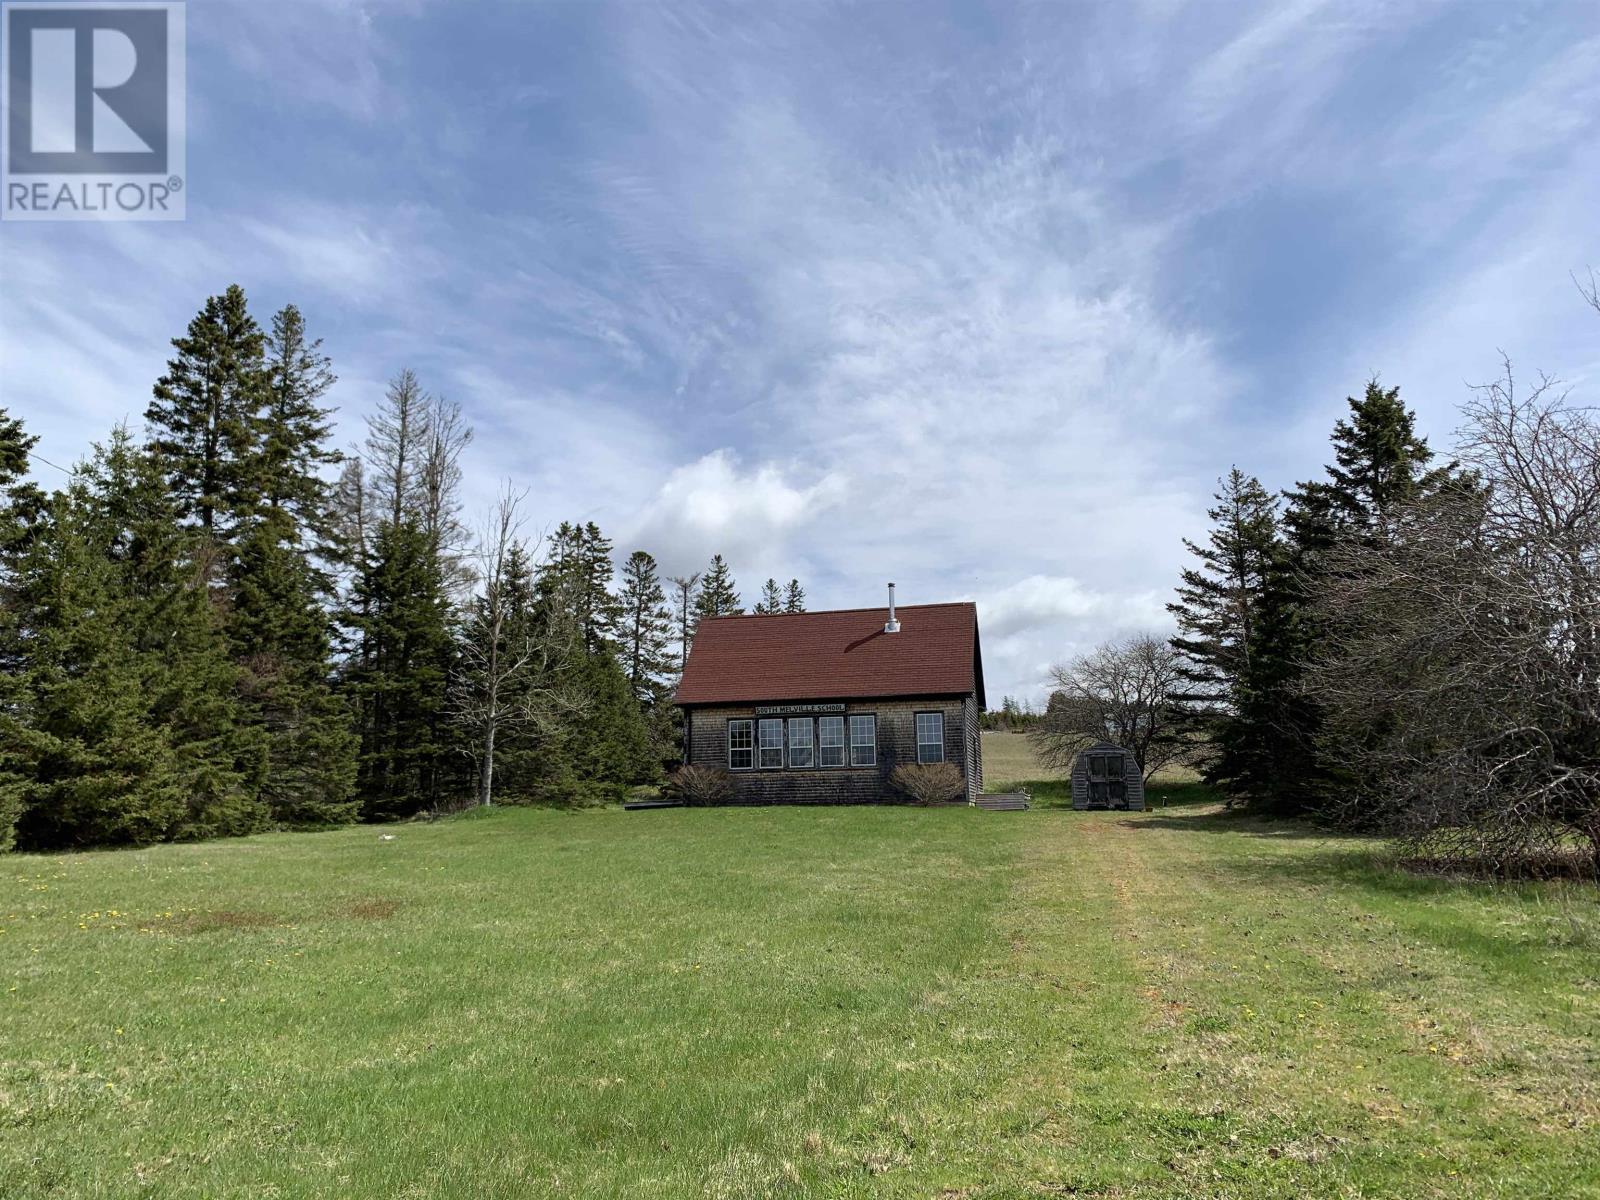 












842 South Melville Road

,
South Melville,




Prince Edward Island
C0A1C0

